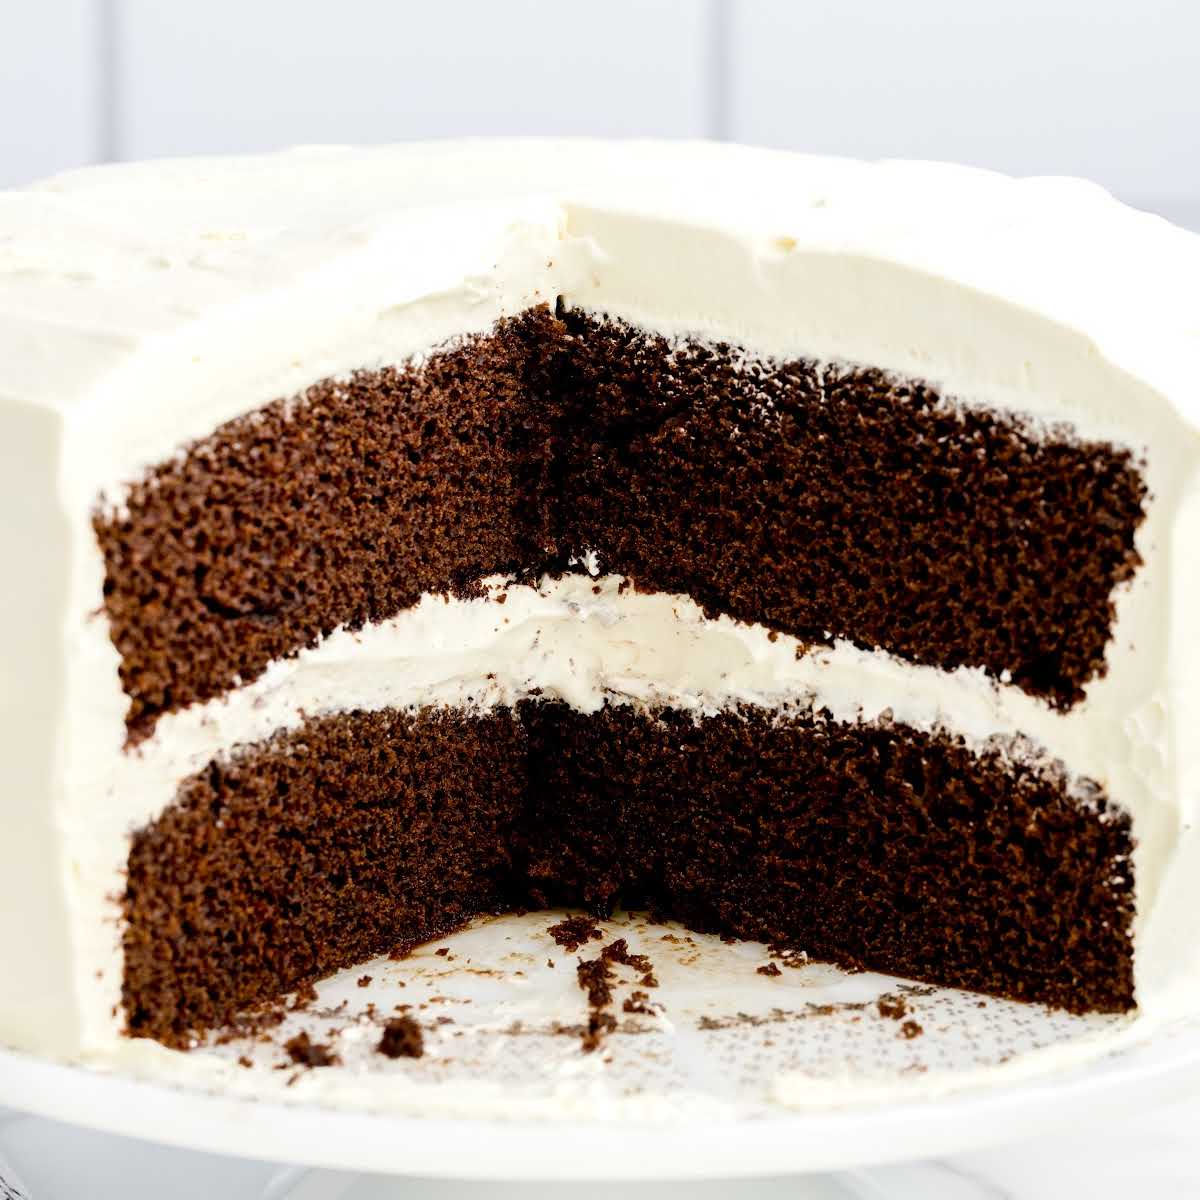 Chocolate Cake with Whipped Cream Frosting - Spaceships and Laser Beams